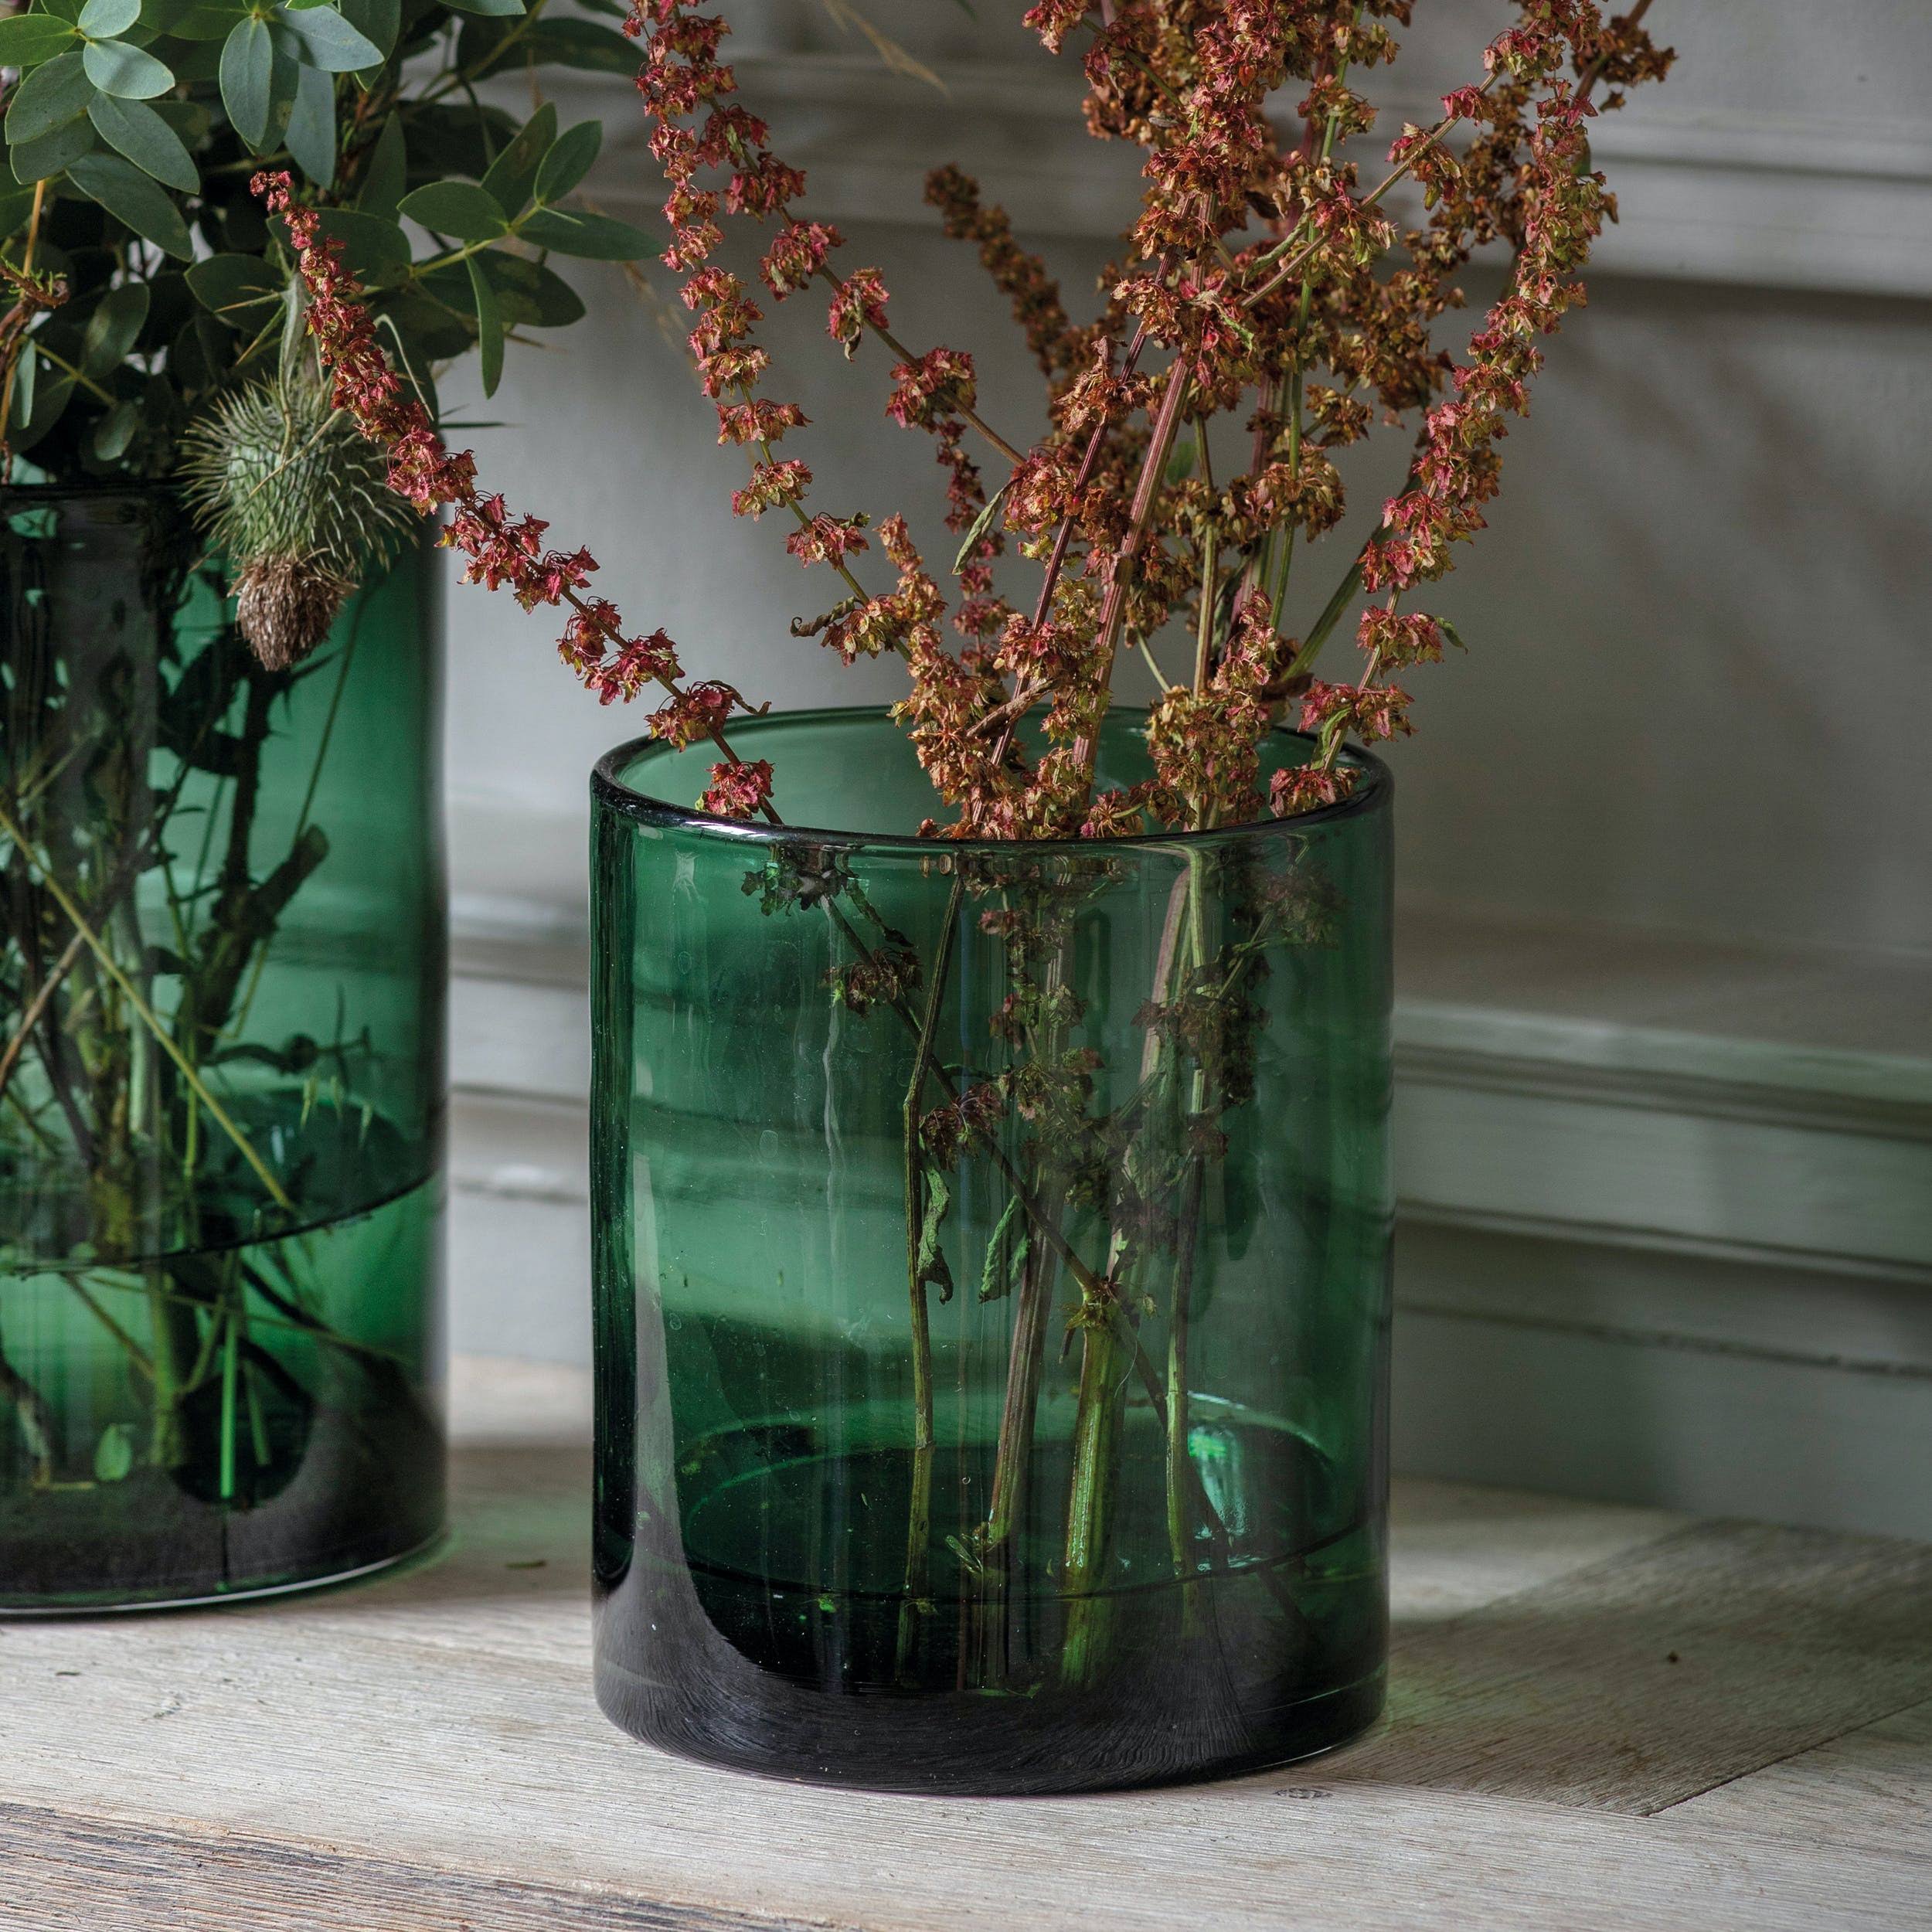 Garden Trading - Oban Vase In Forest Green Small